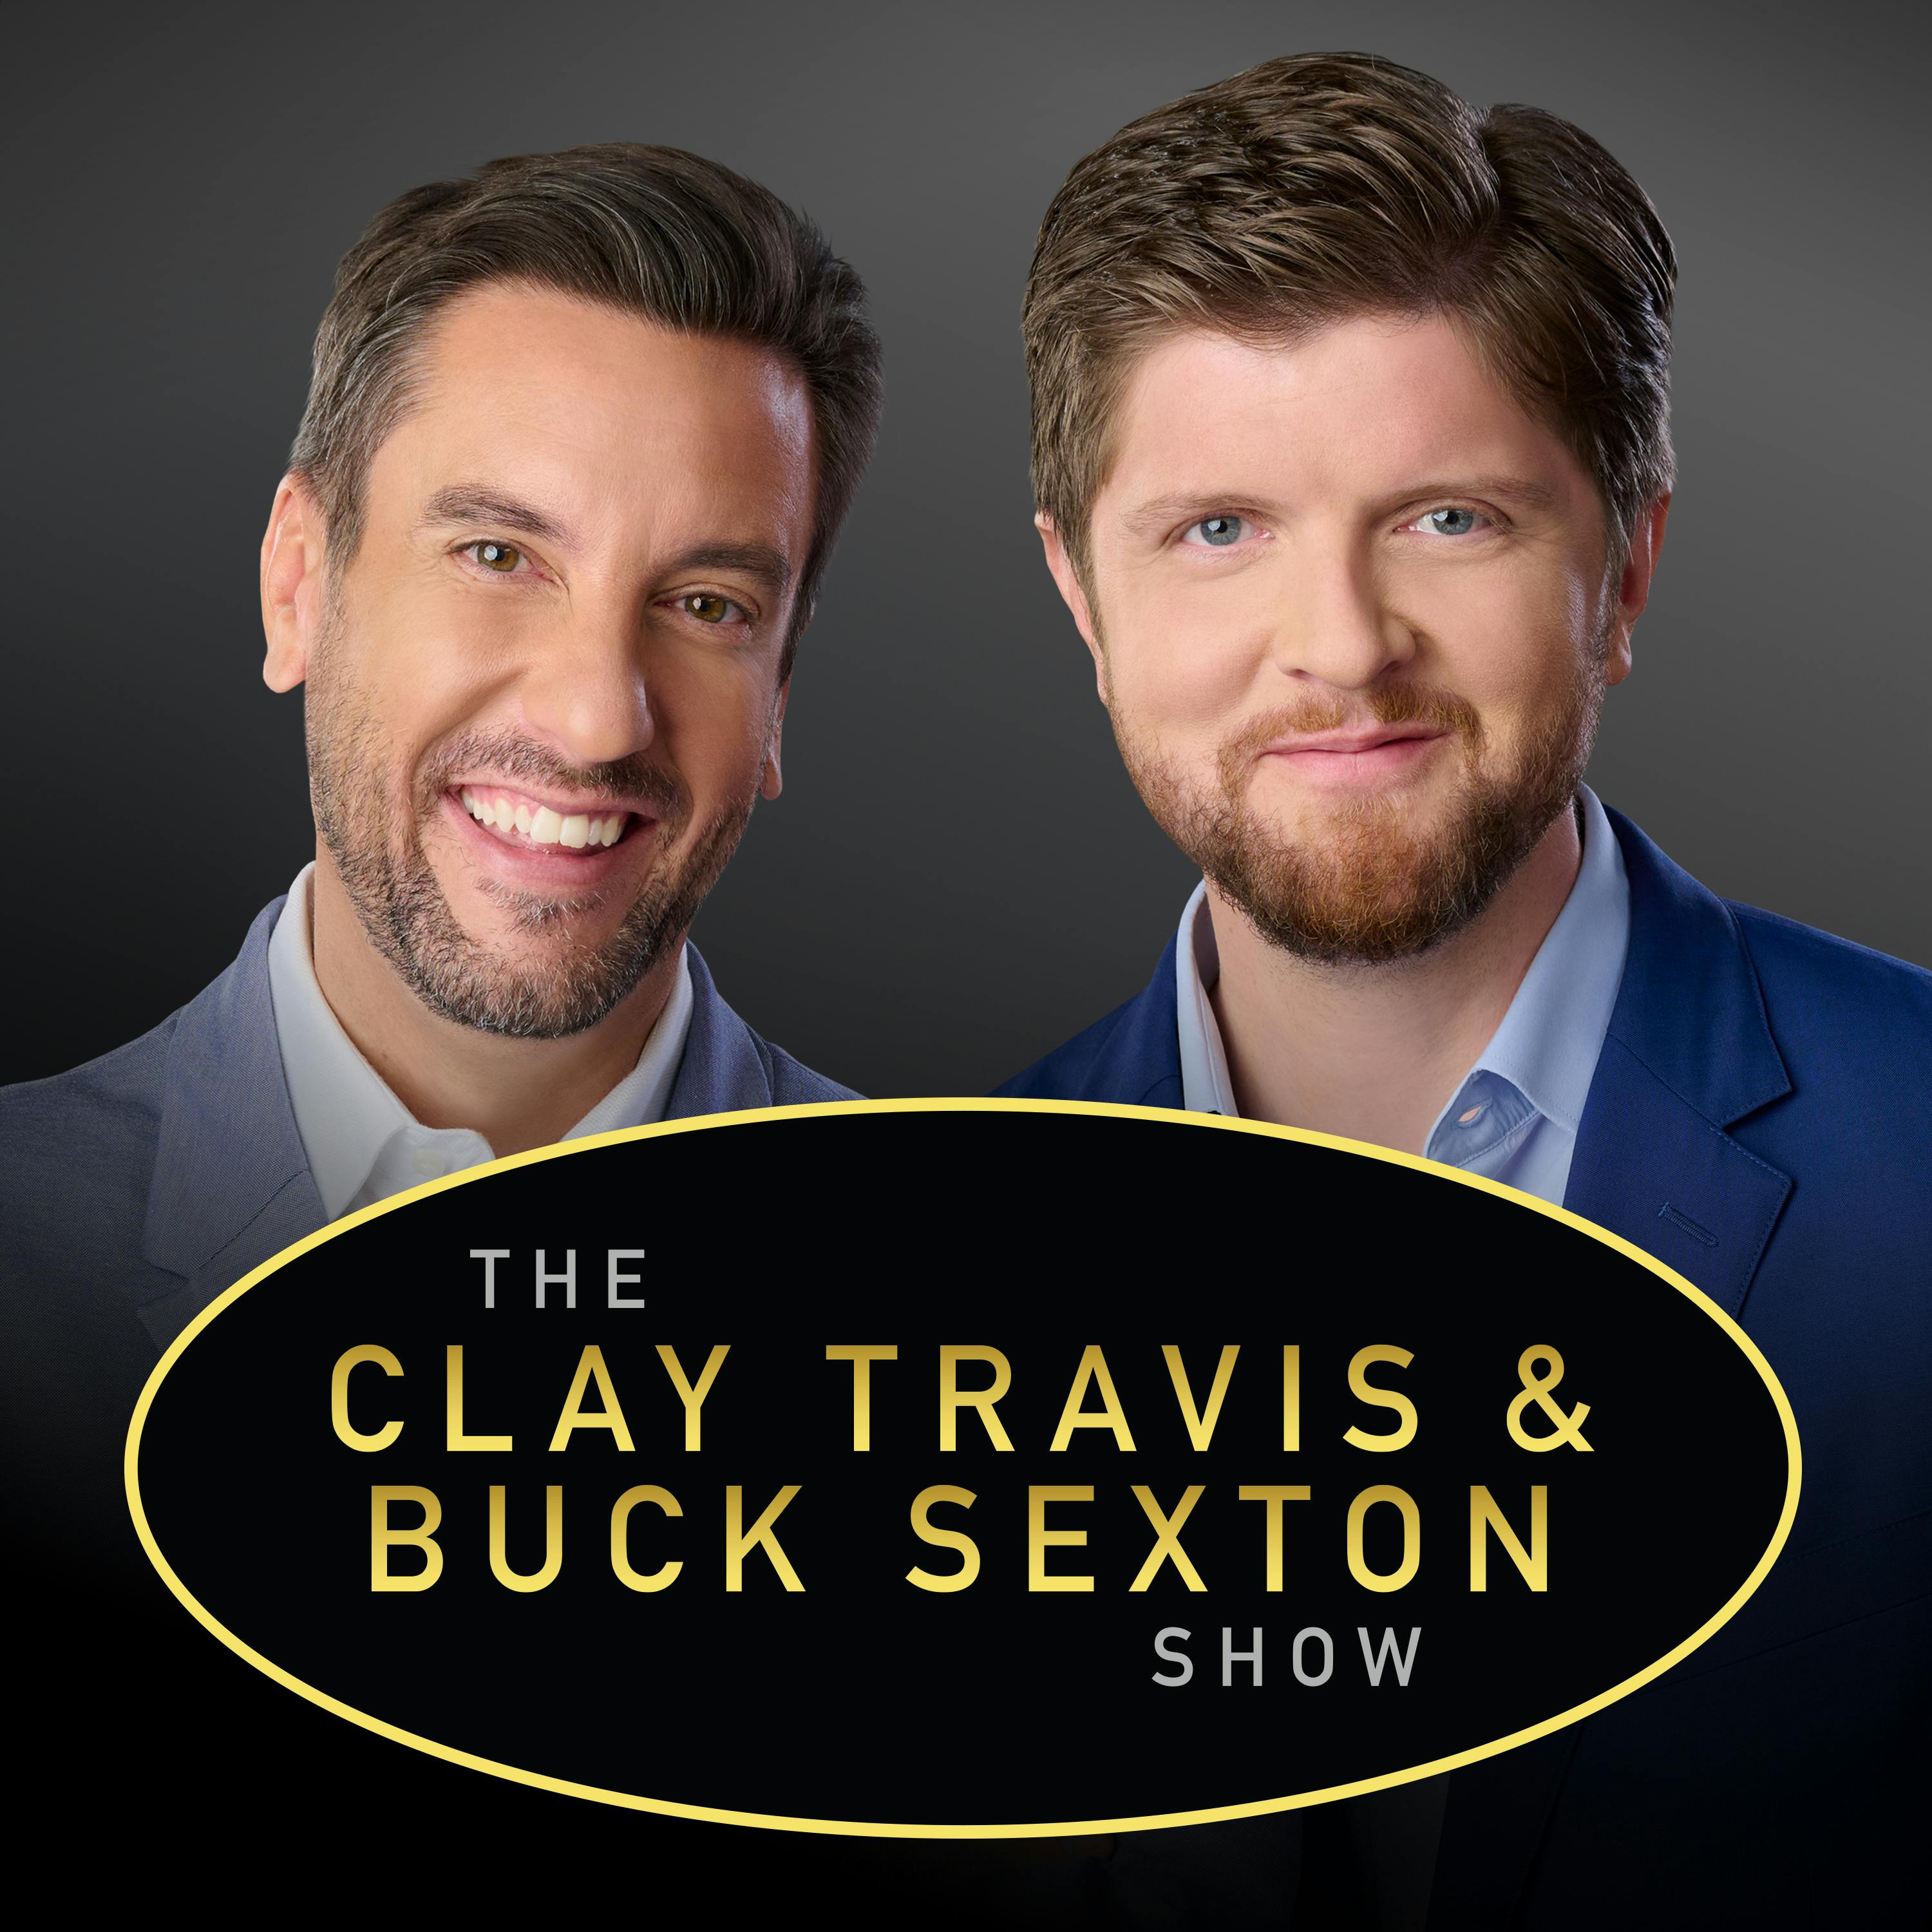 Clay Travis and Buck Sexton Show H1 – Jan 20 2022